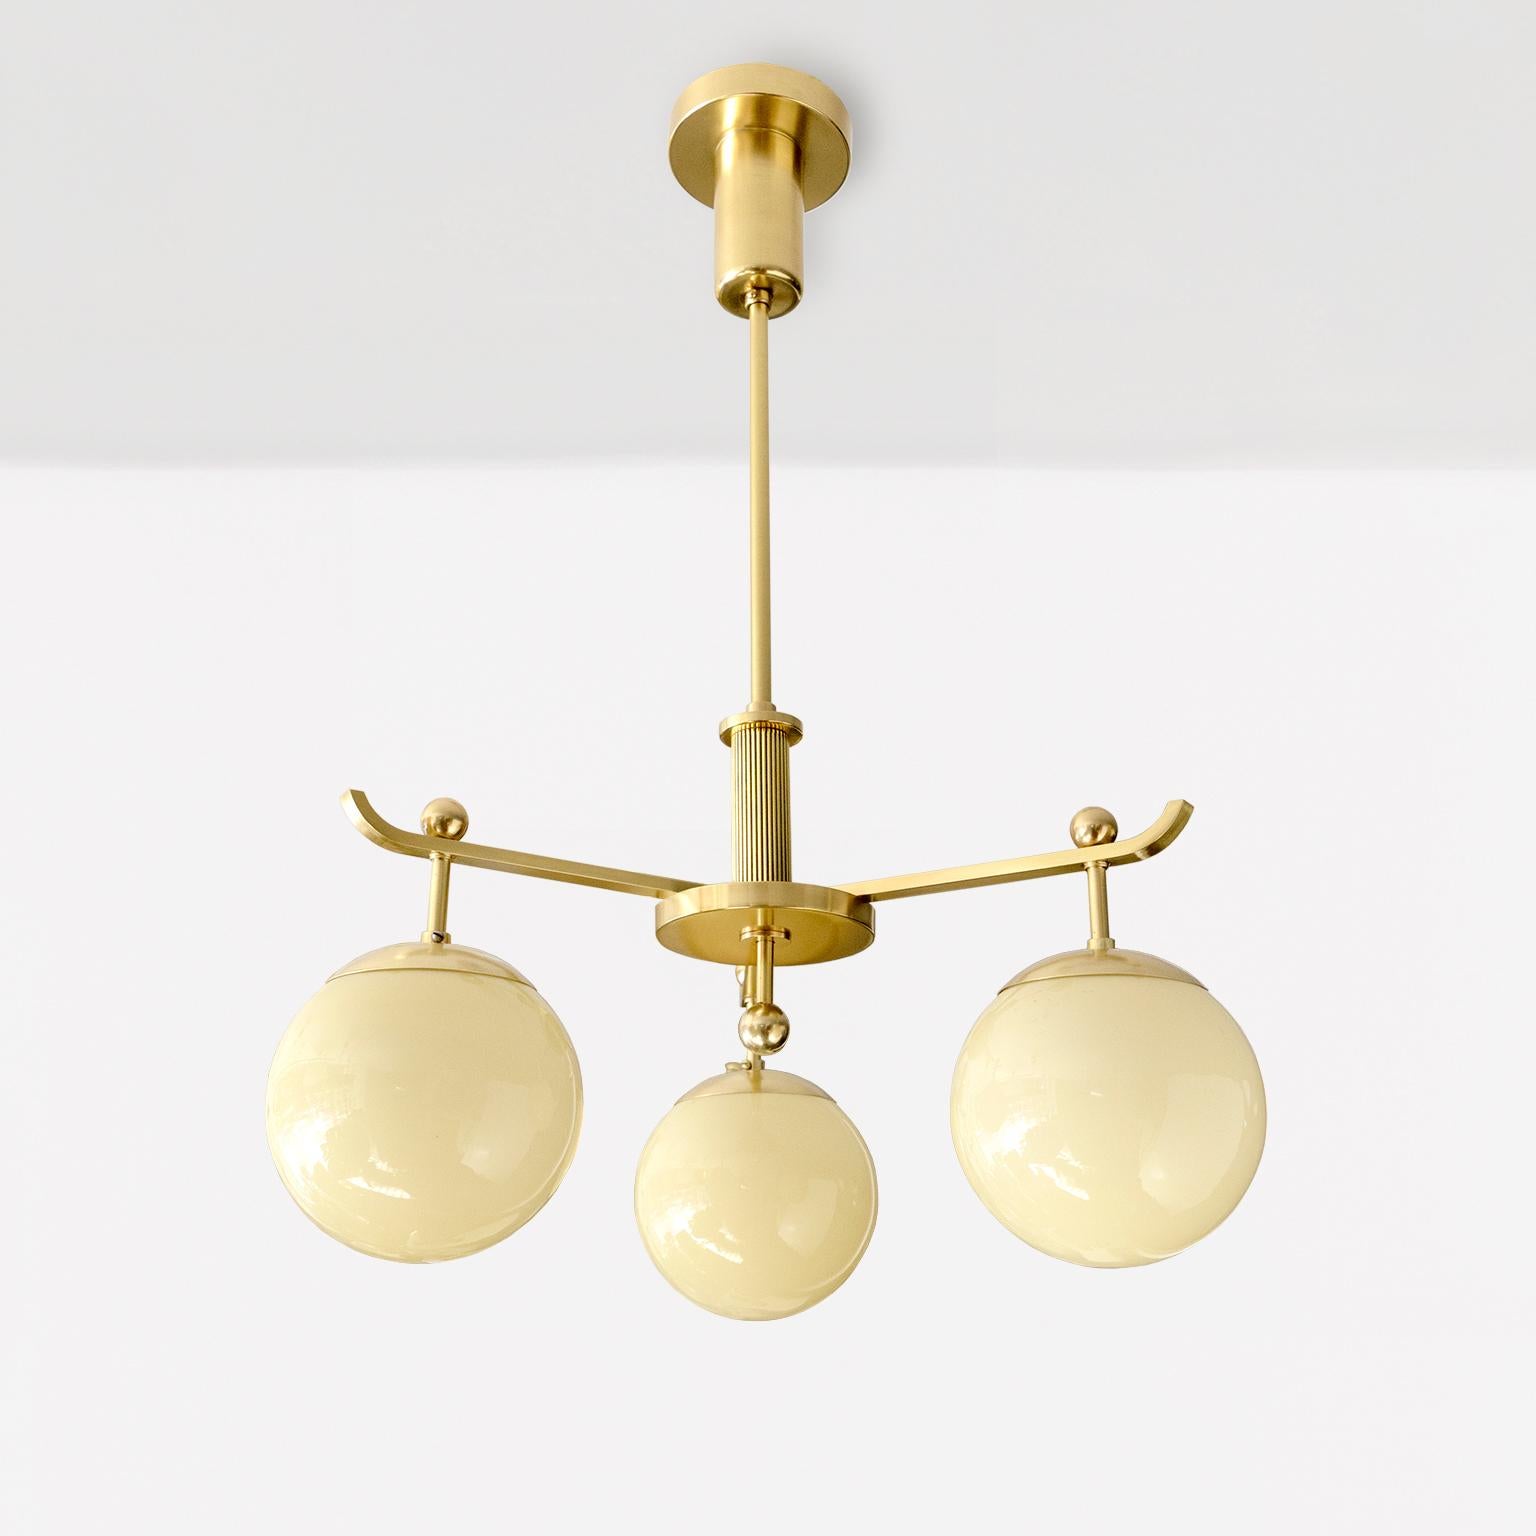 A Swedish Art Deco polished 3-arm brass chandelier with glass globes. The overall design is a play on balance between the arms, the stem, final, canopy and globes. An elegant modernist lamp fixture from circa 1930.

Newly restored, polished and